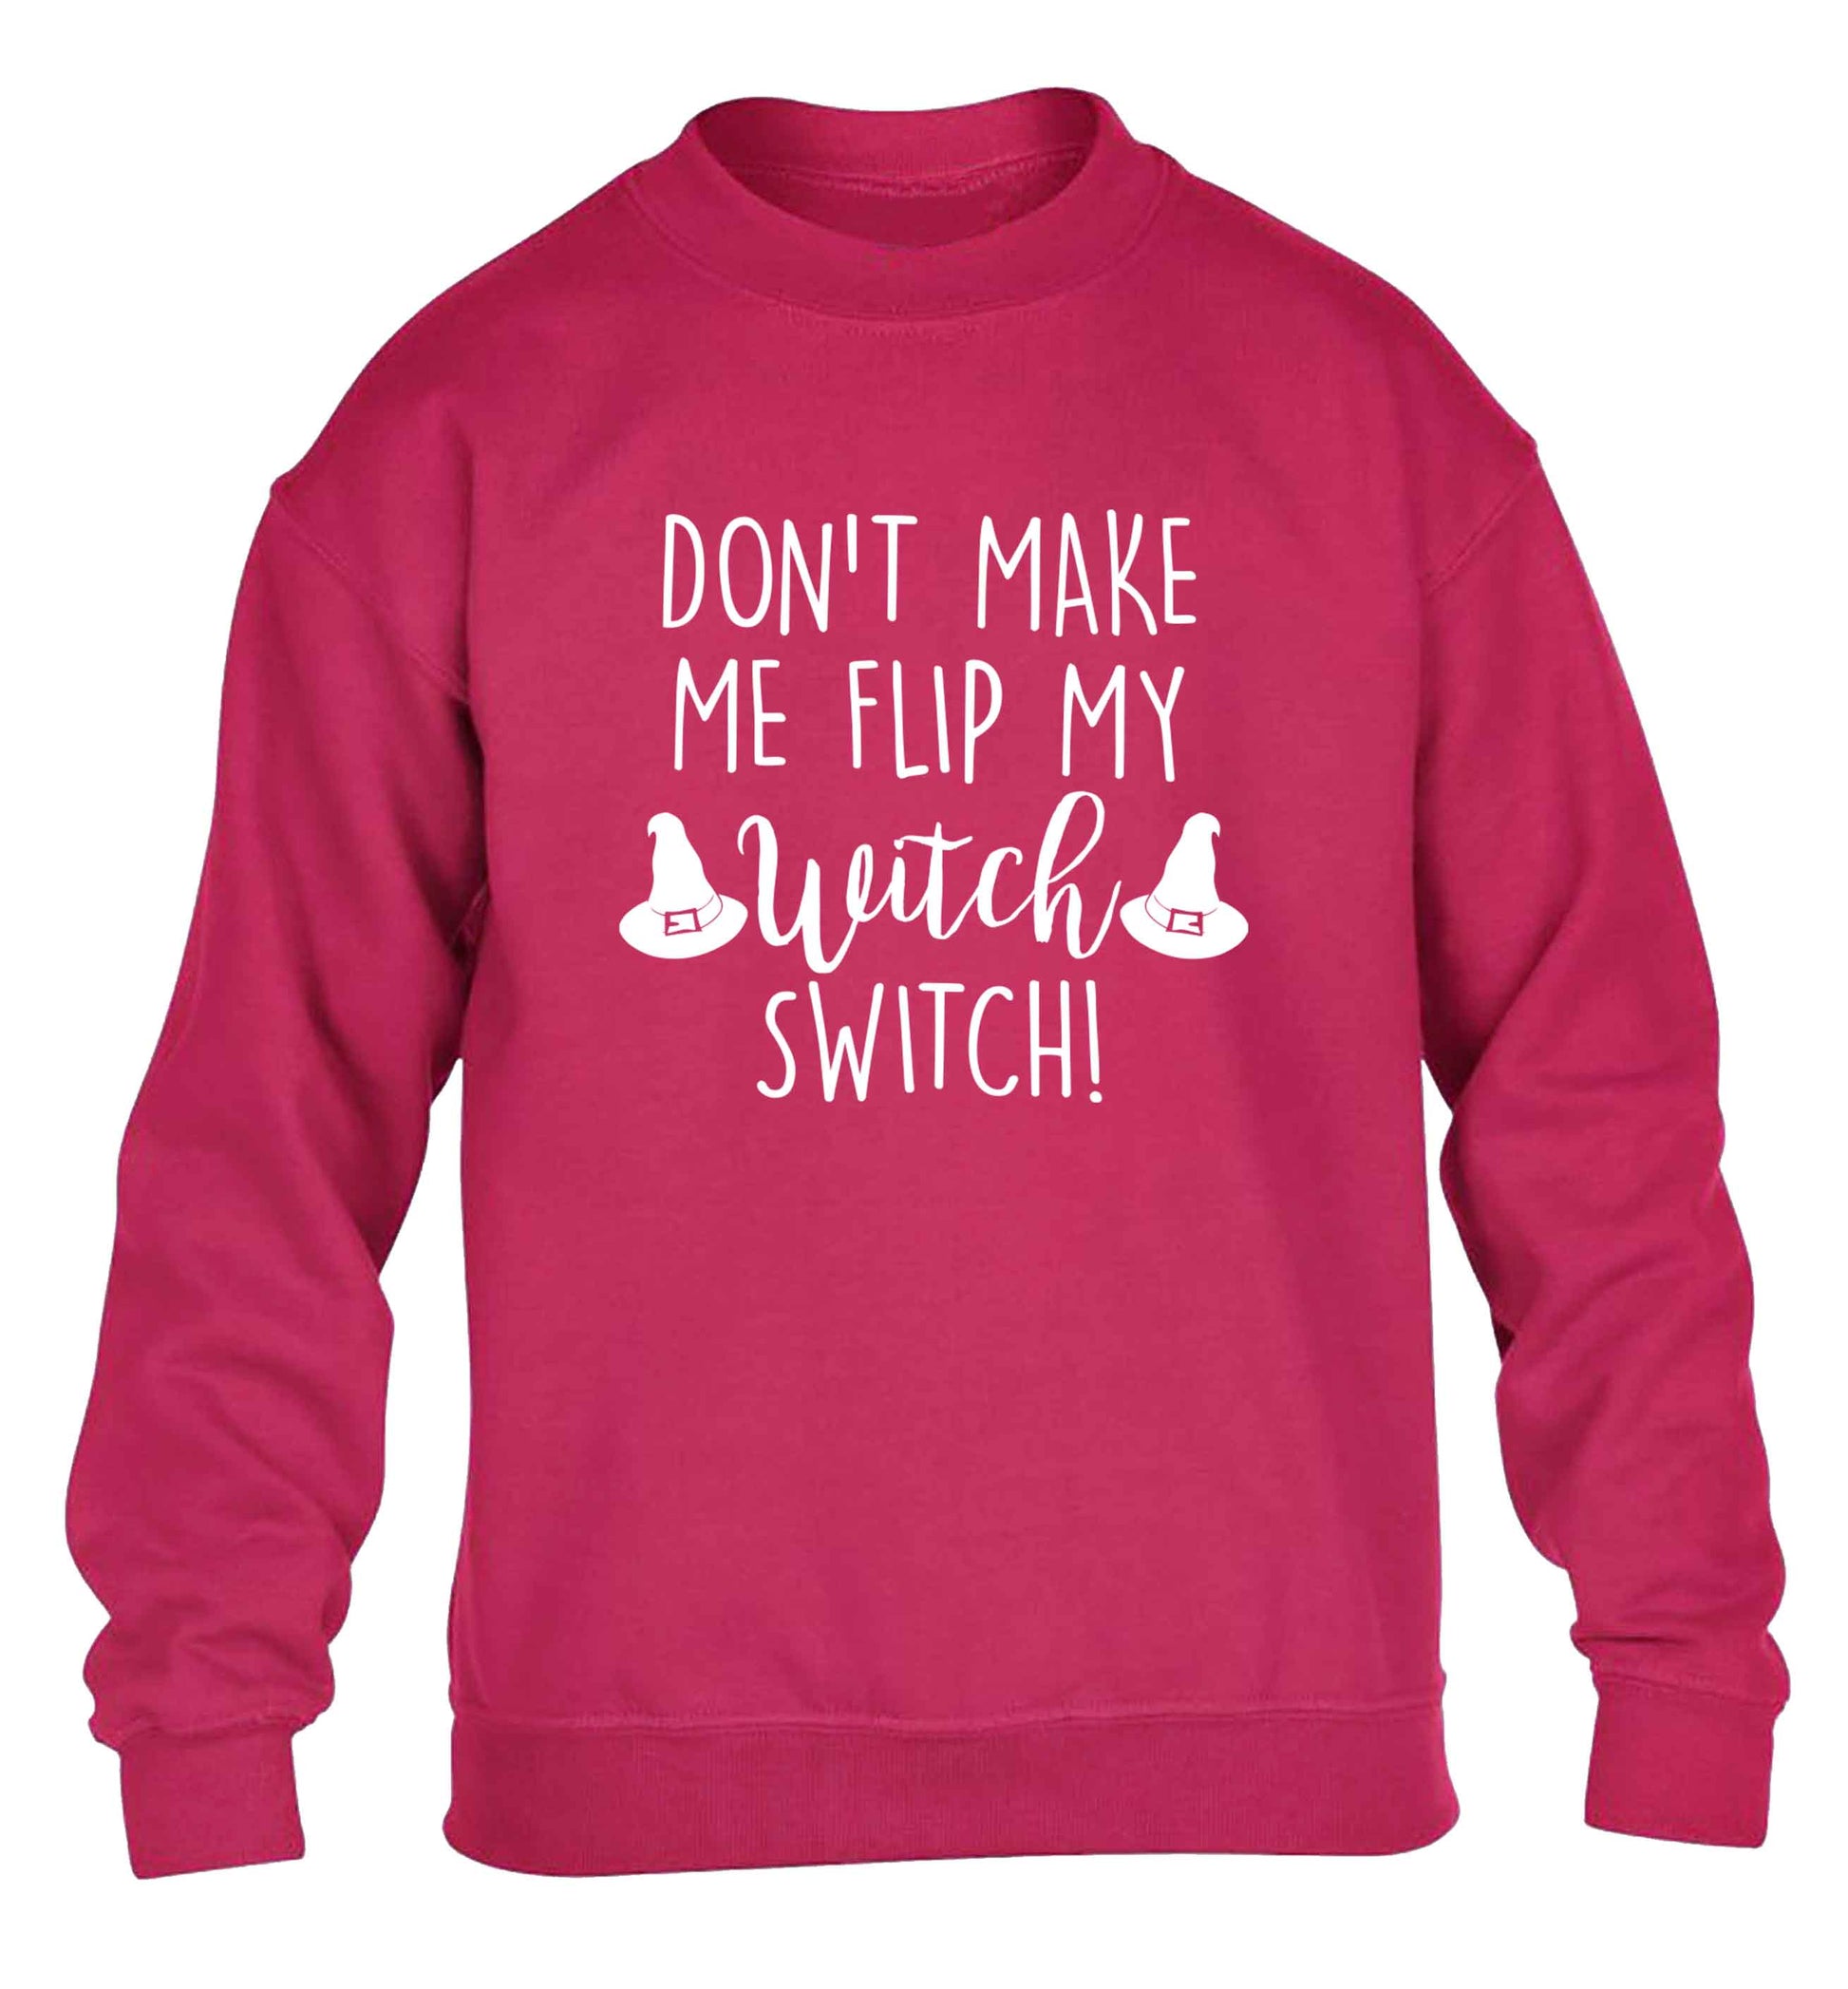 Don't make me flip my witch switch children's pink sweater 12-13 Years